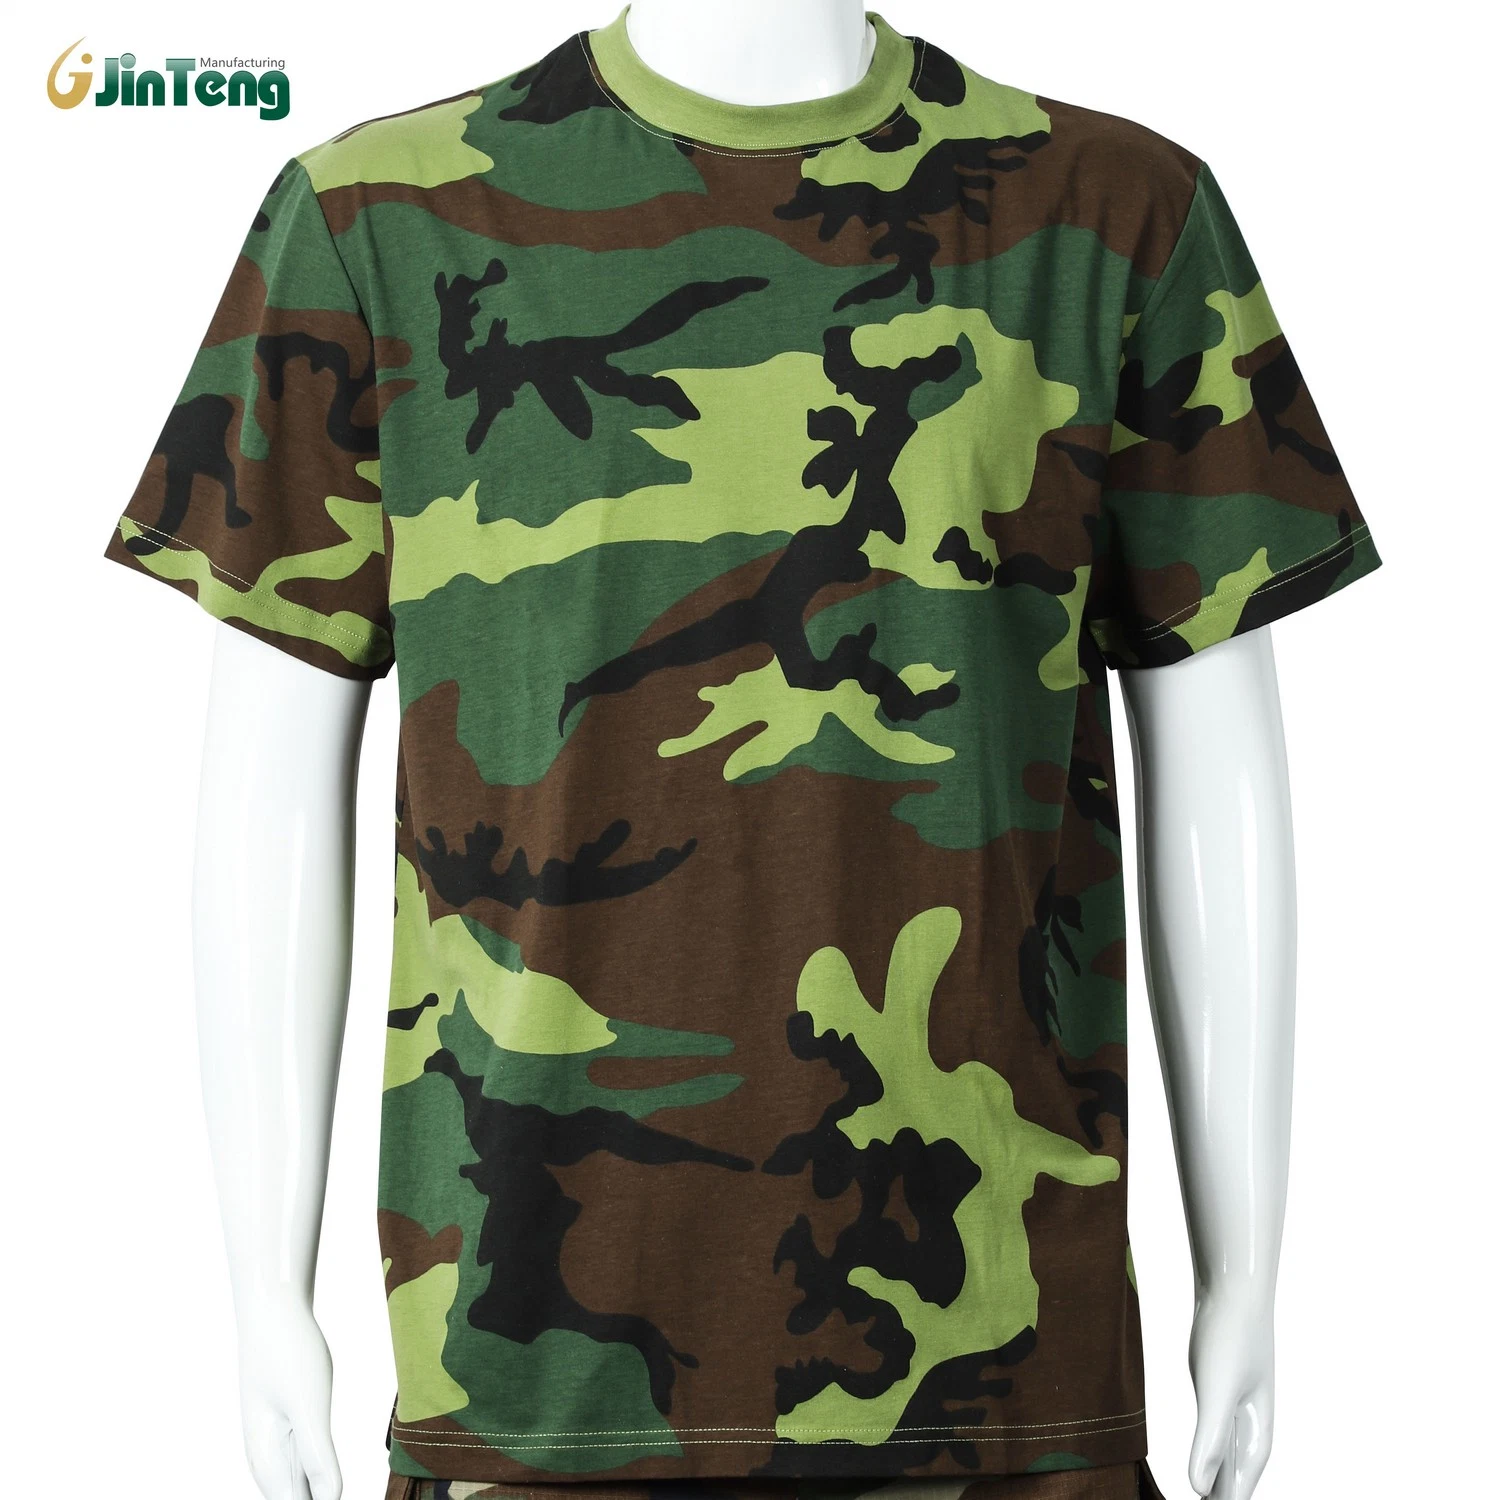 Cheap Price Printed Polo Neck Jinteng Camouflage Shirt for Men Military style T-Shirt